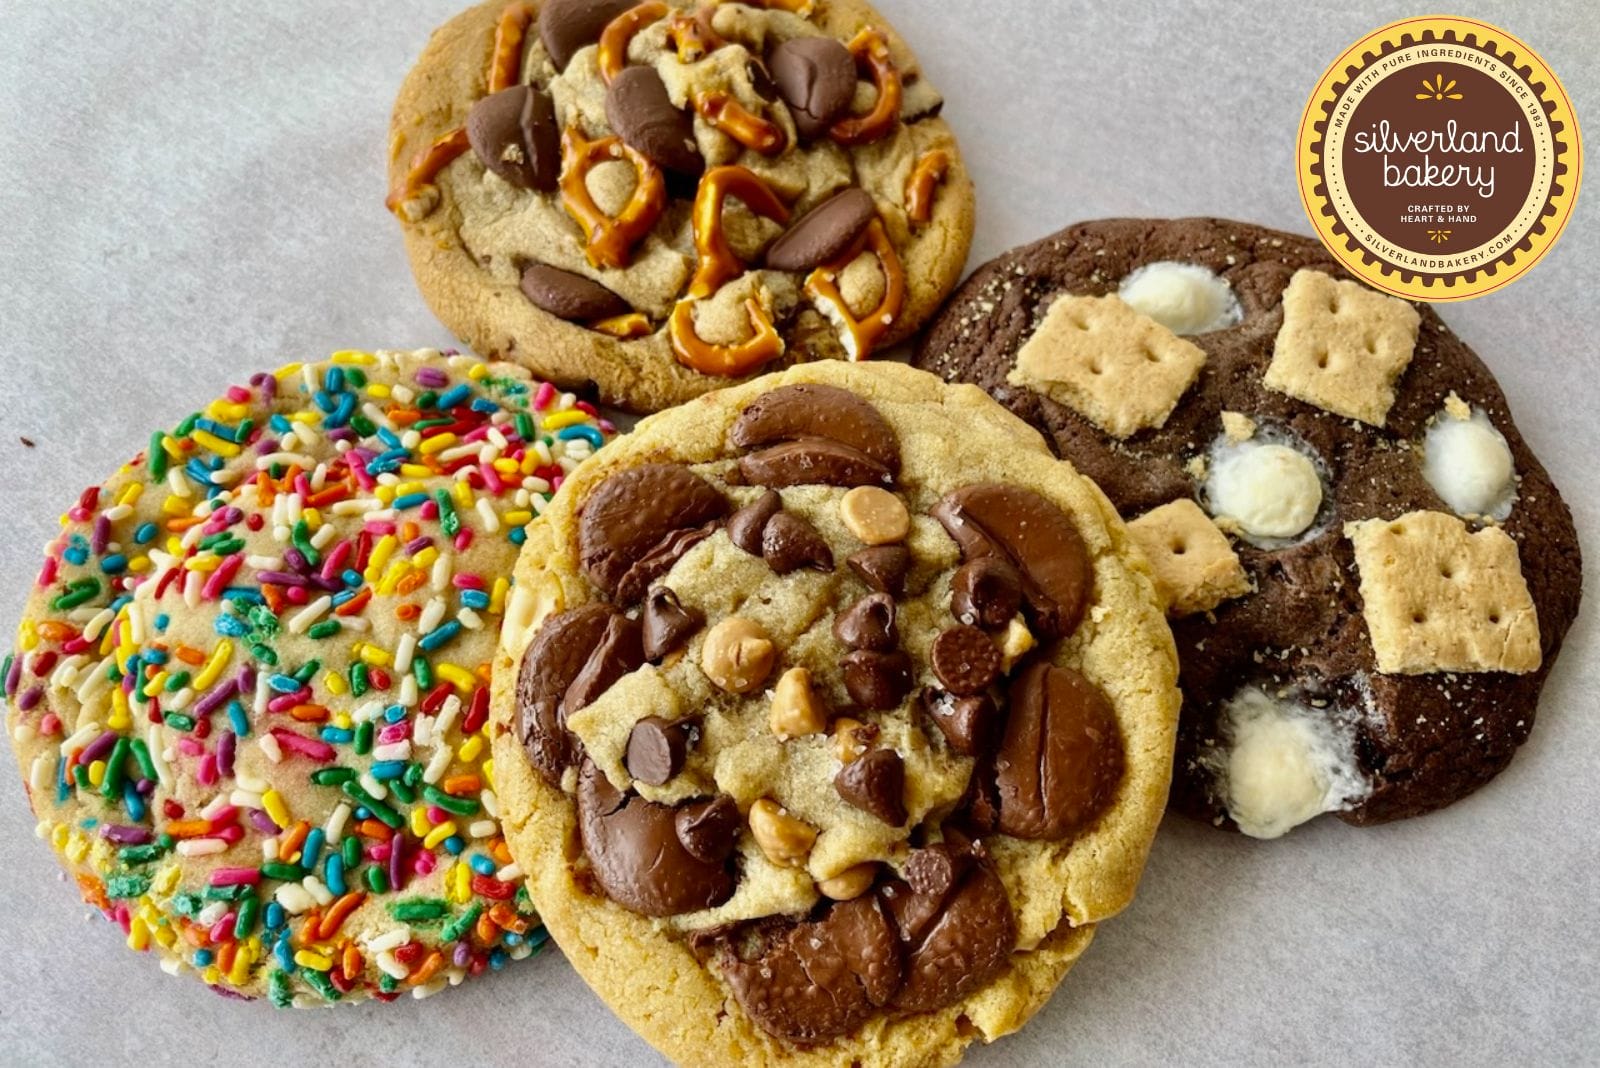 Silverland Bakery's line of creative cookies